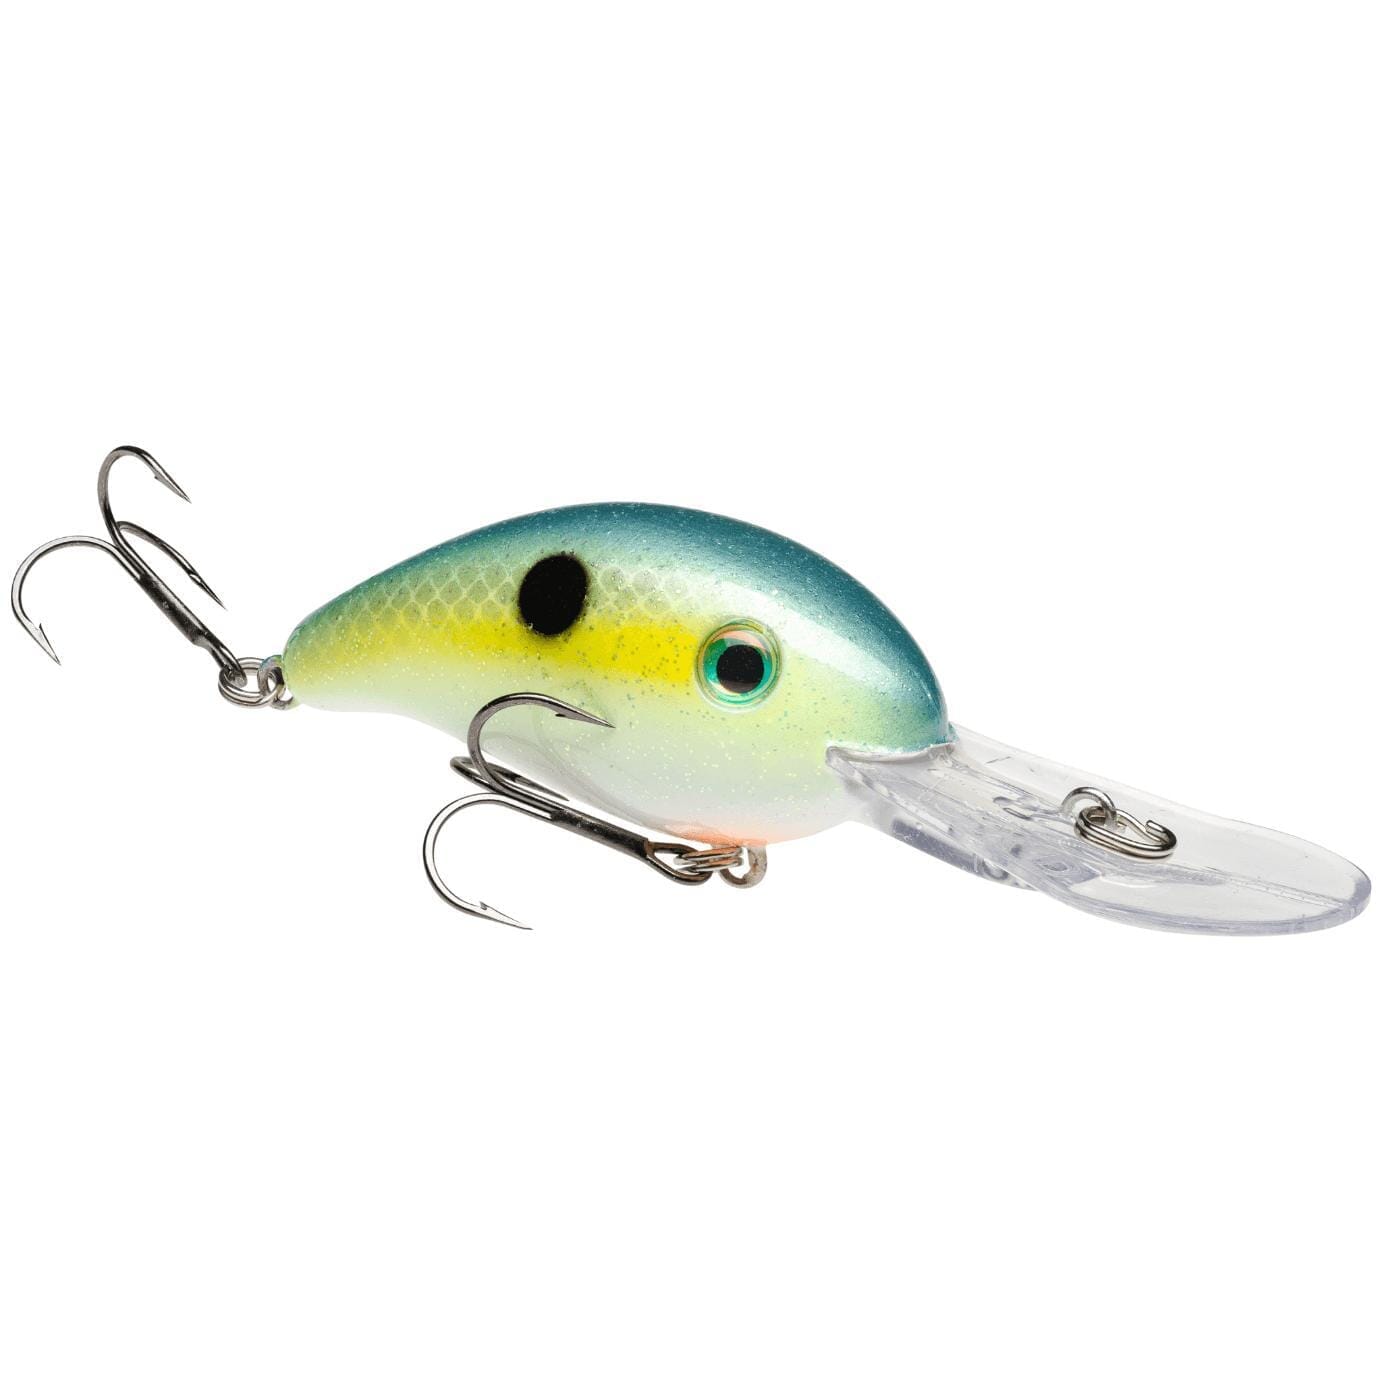 Strike King Pro-Model 3Xd Chartreuse Sexy Shad